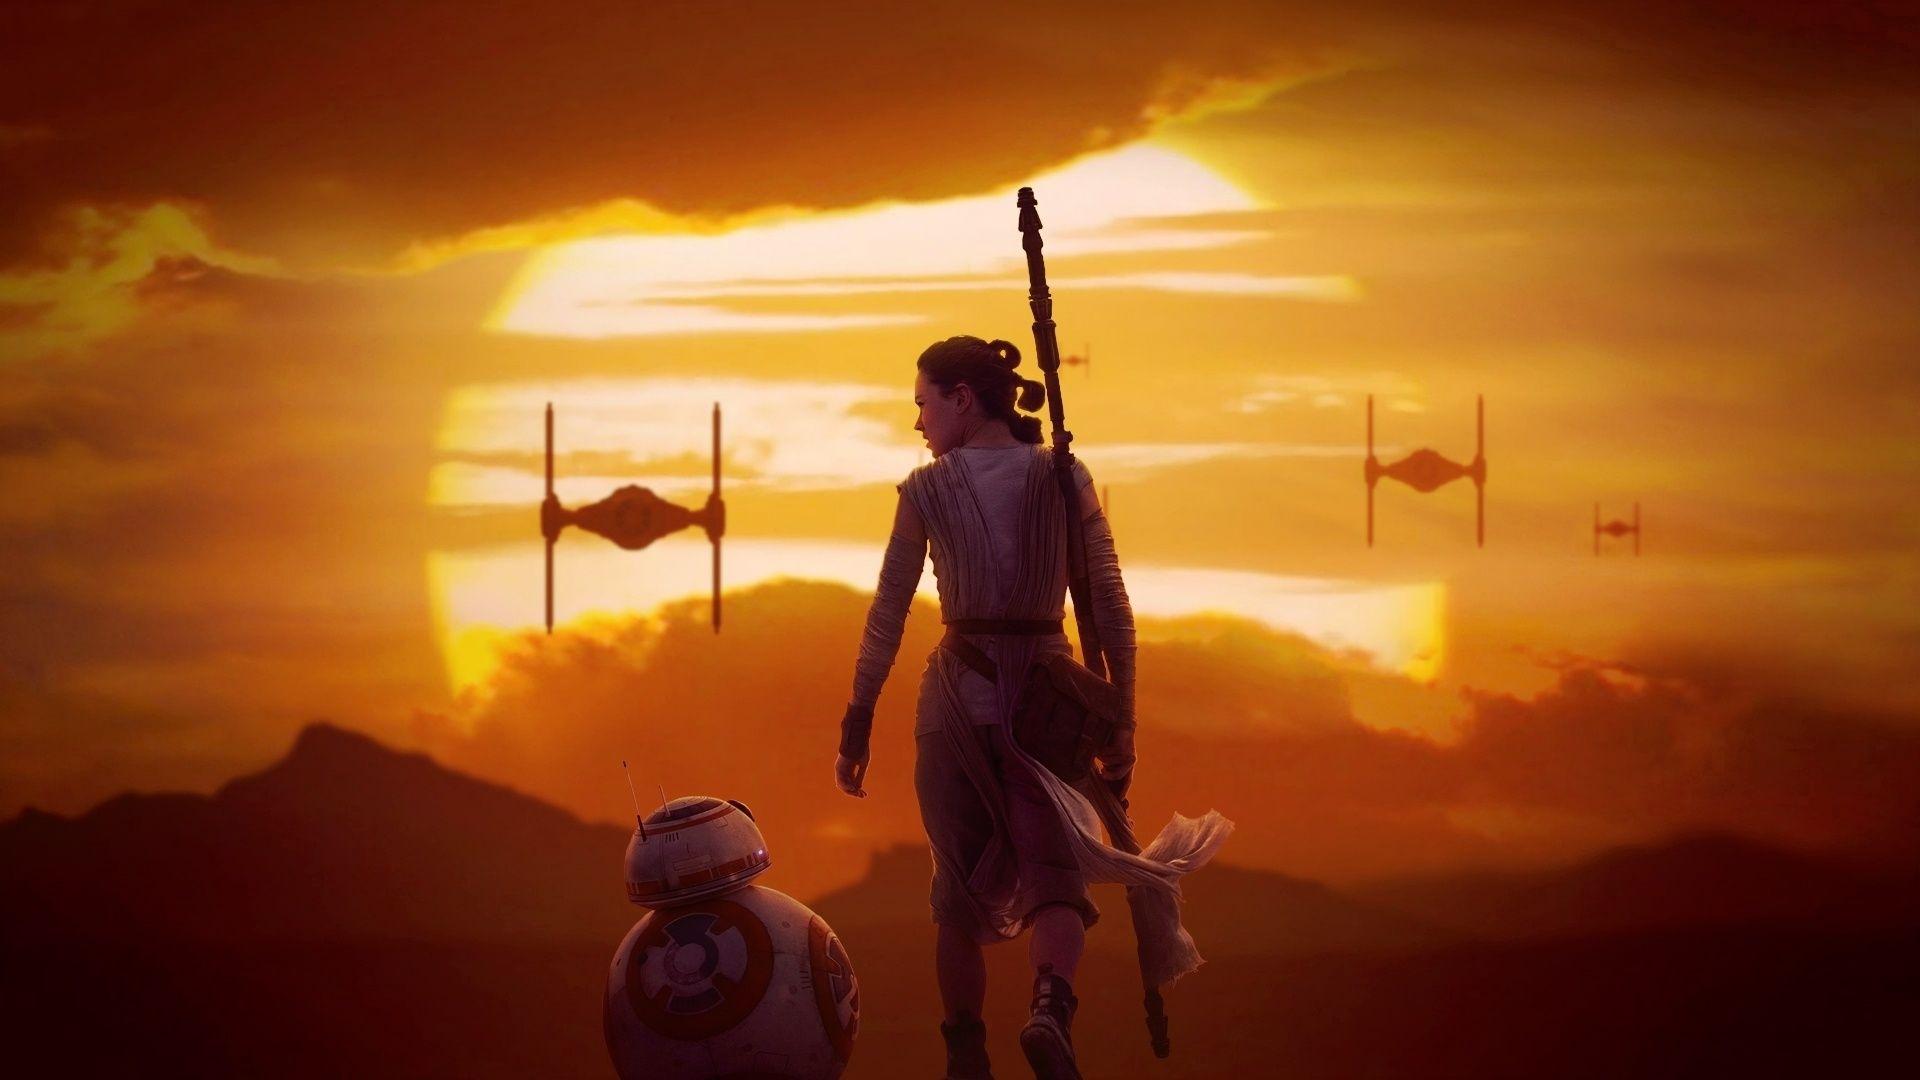 Rey and BB8 Star Wars VII wallpaper. iOS wallpaper and Android